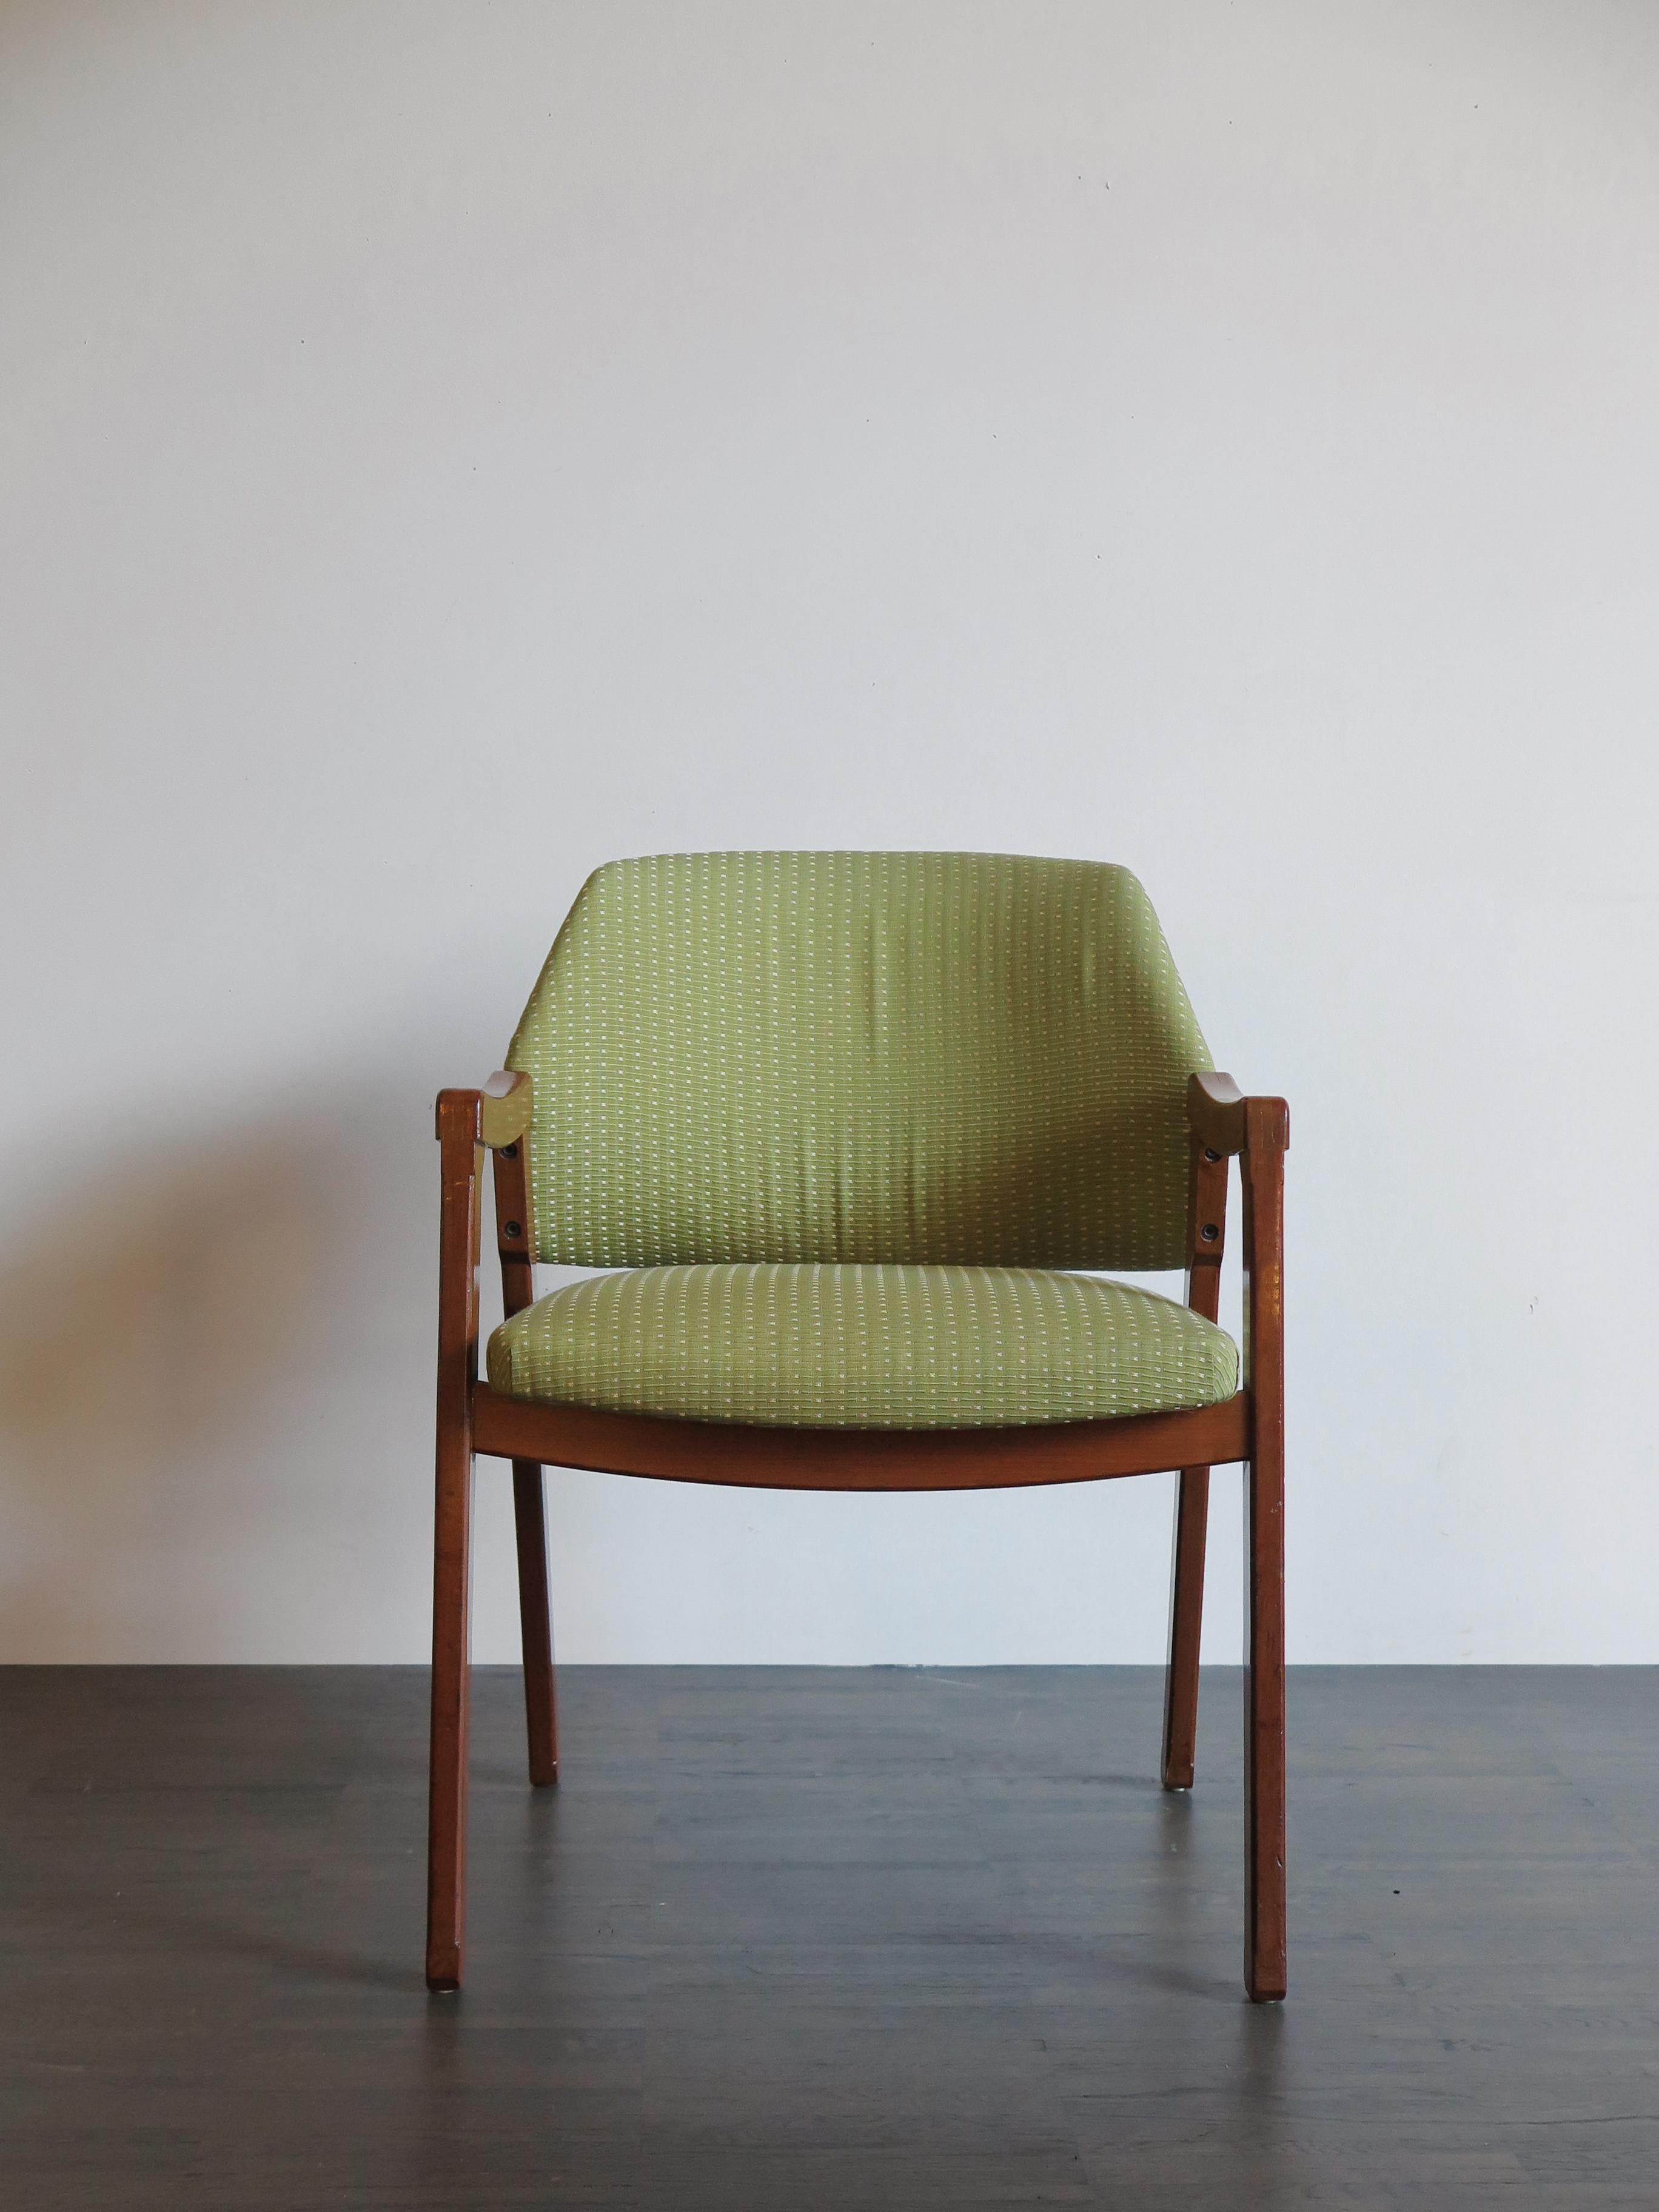 Italian Mid-Century Modern design rare and famous armchair model 814 designed by Ico Parisi for Cassina in 1961, solid wood structure and original fabric covering.

Please note that the item is original of the period and this shows normal signs of